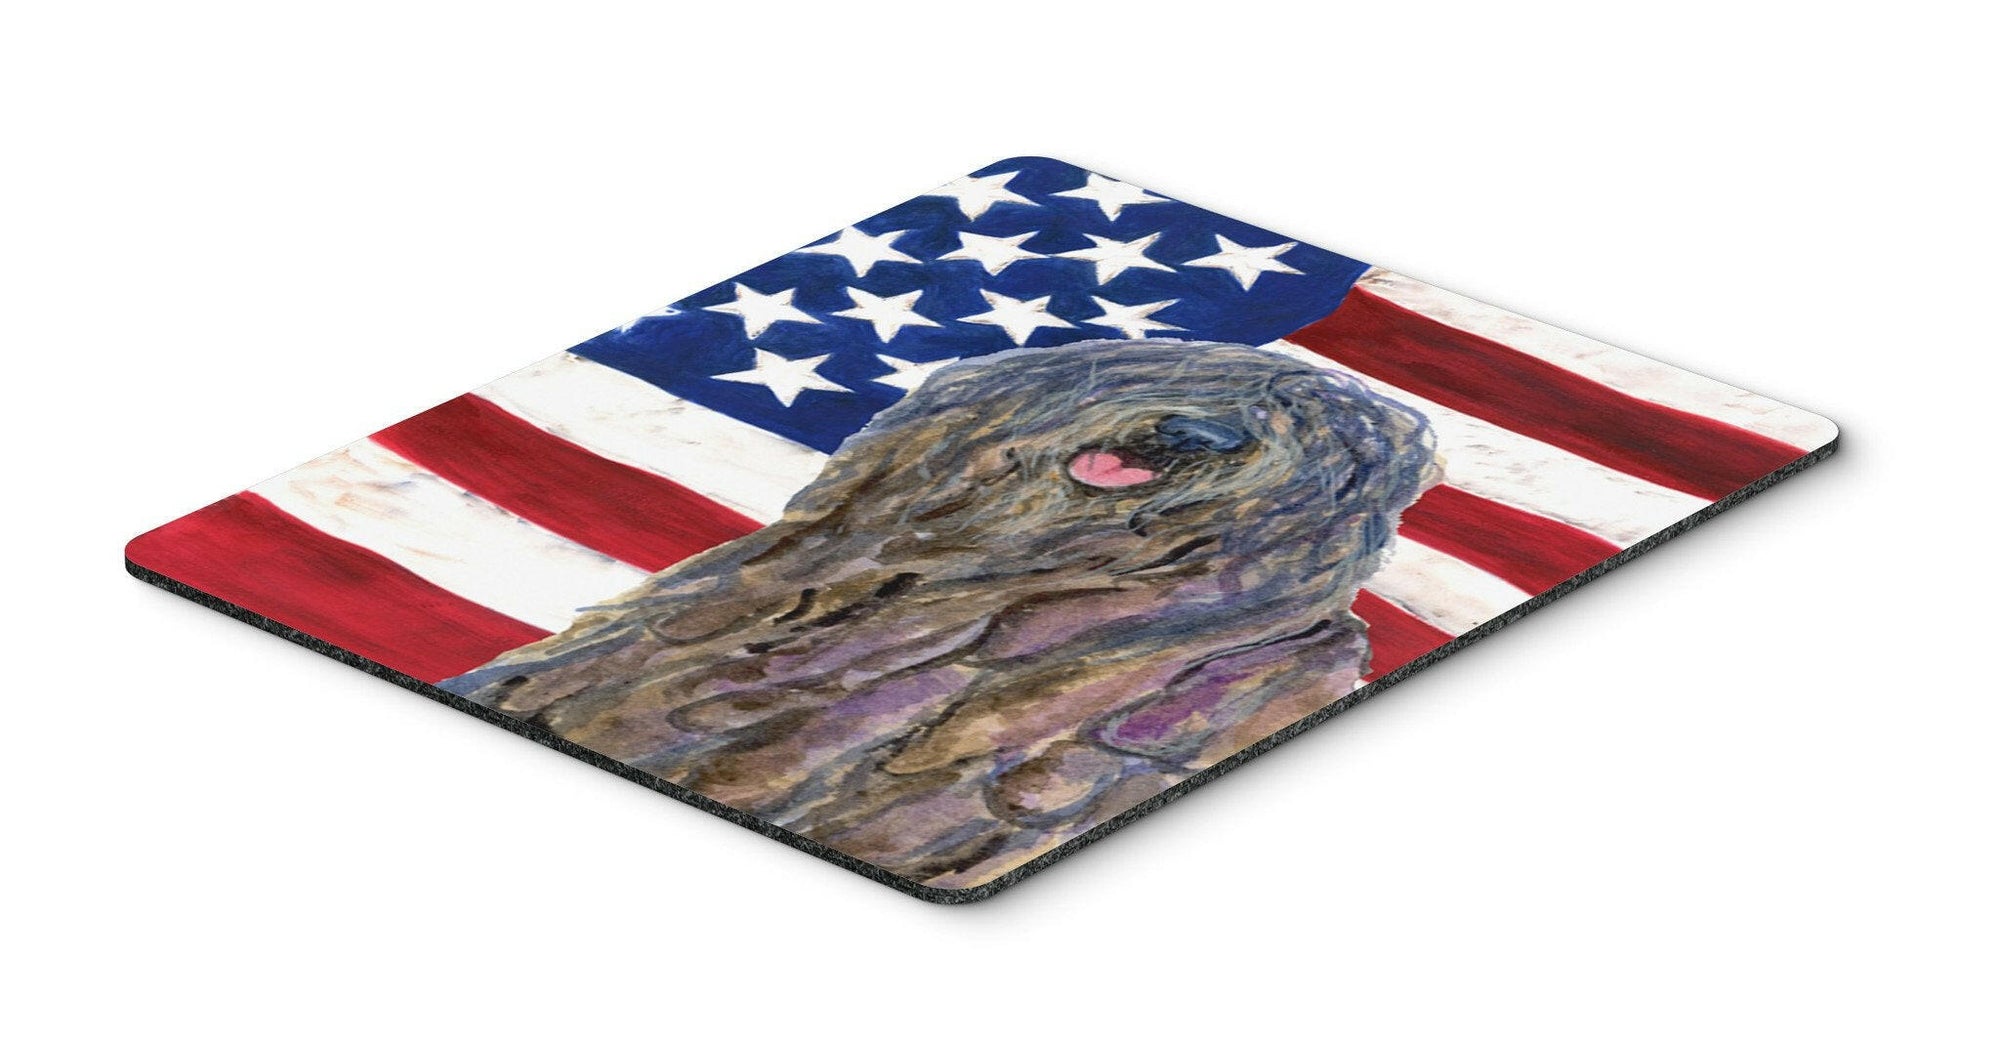 USA American Flag with Bergamasco Sheepdog Mouse Pad, Hot Pad or Trivet by Caroline's Treasures